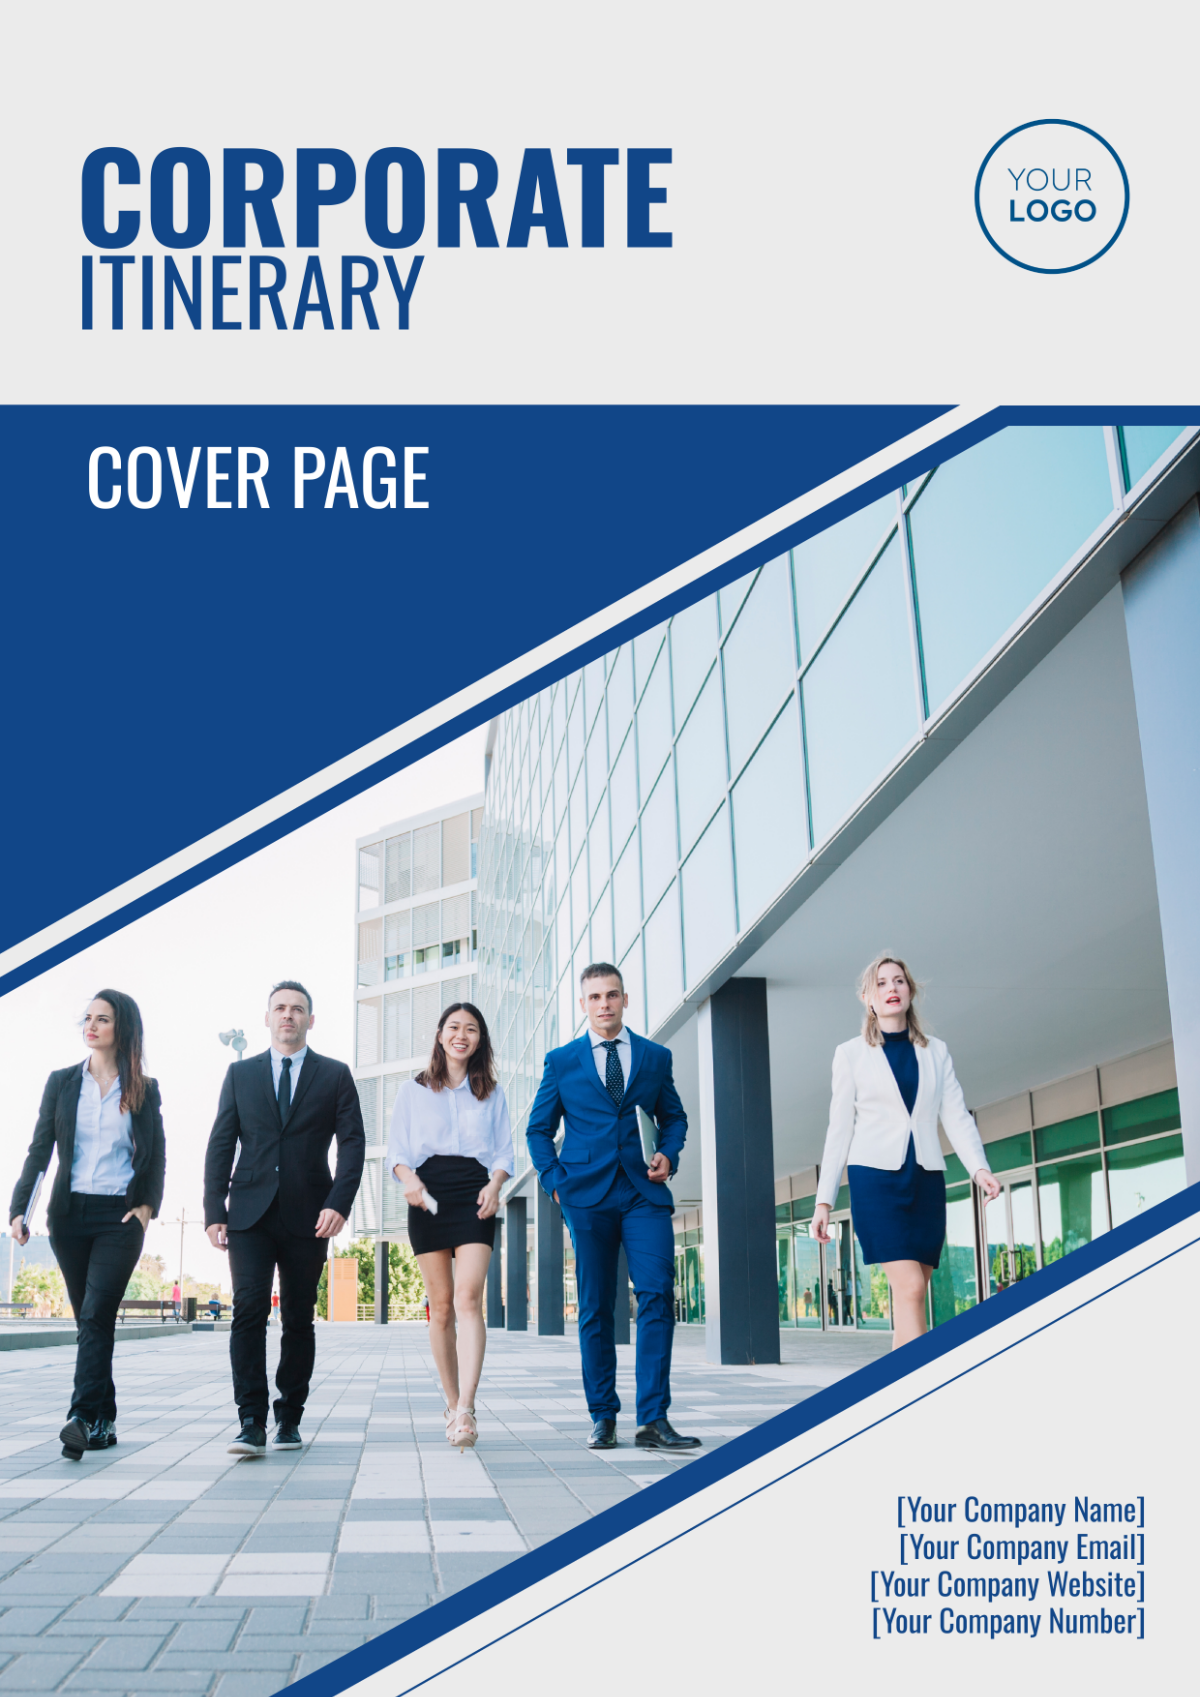 Corporate Itinerary Cover Page